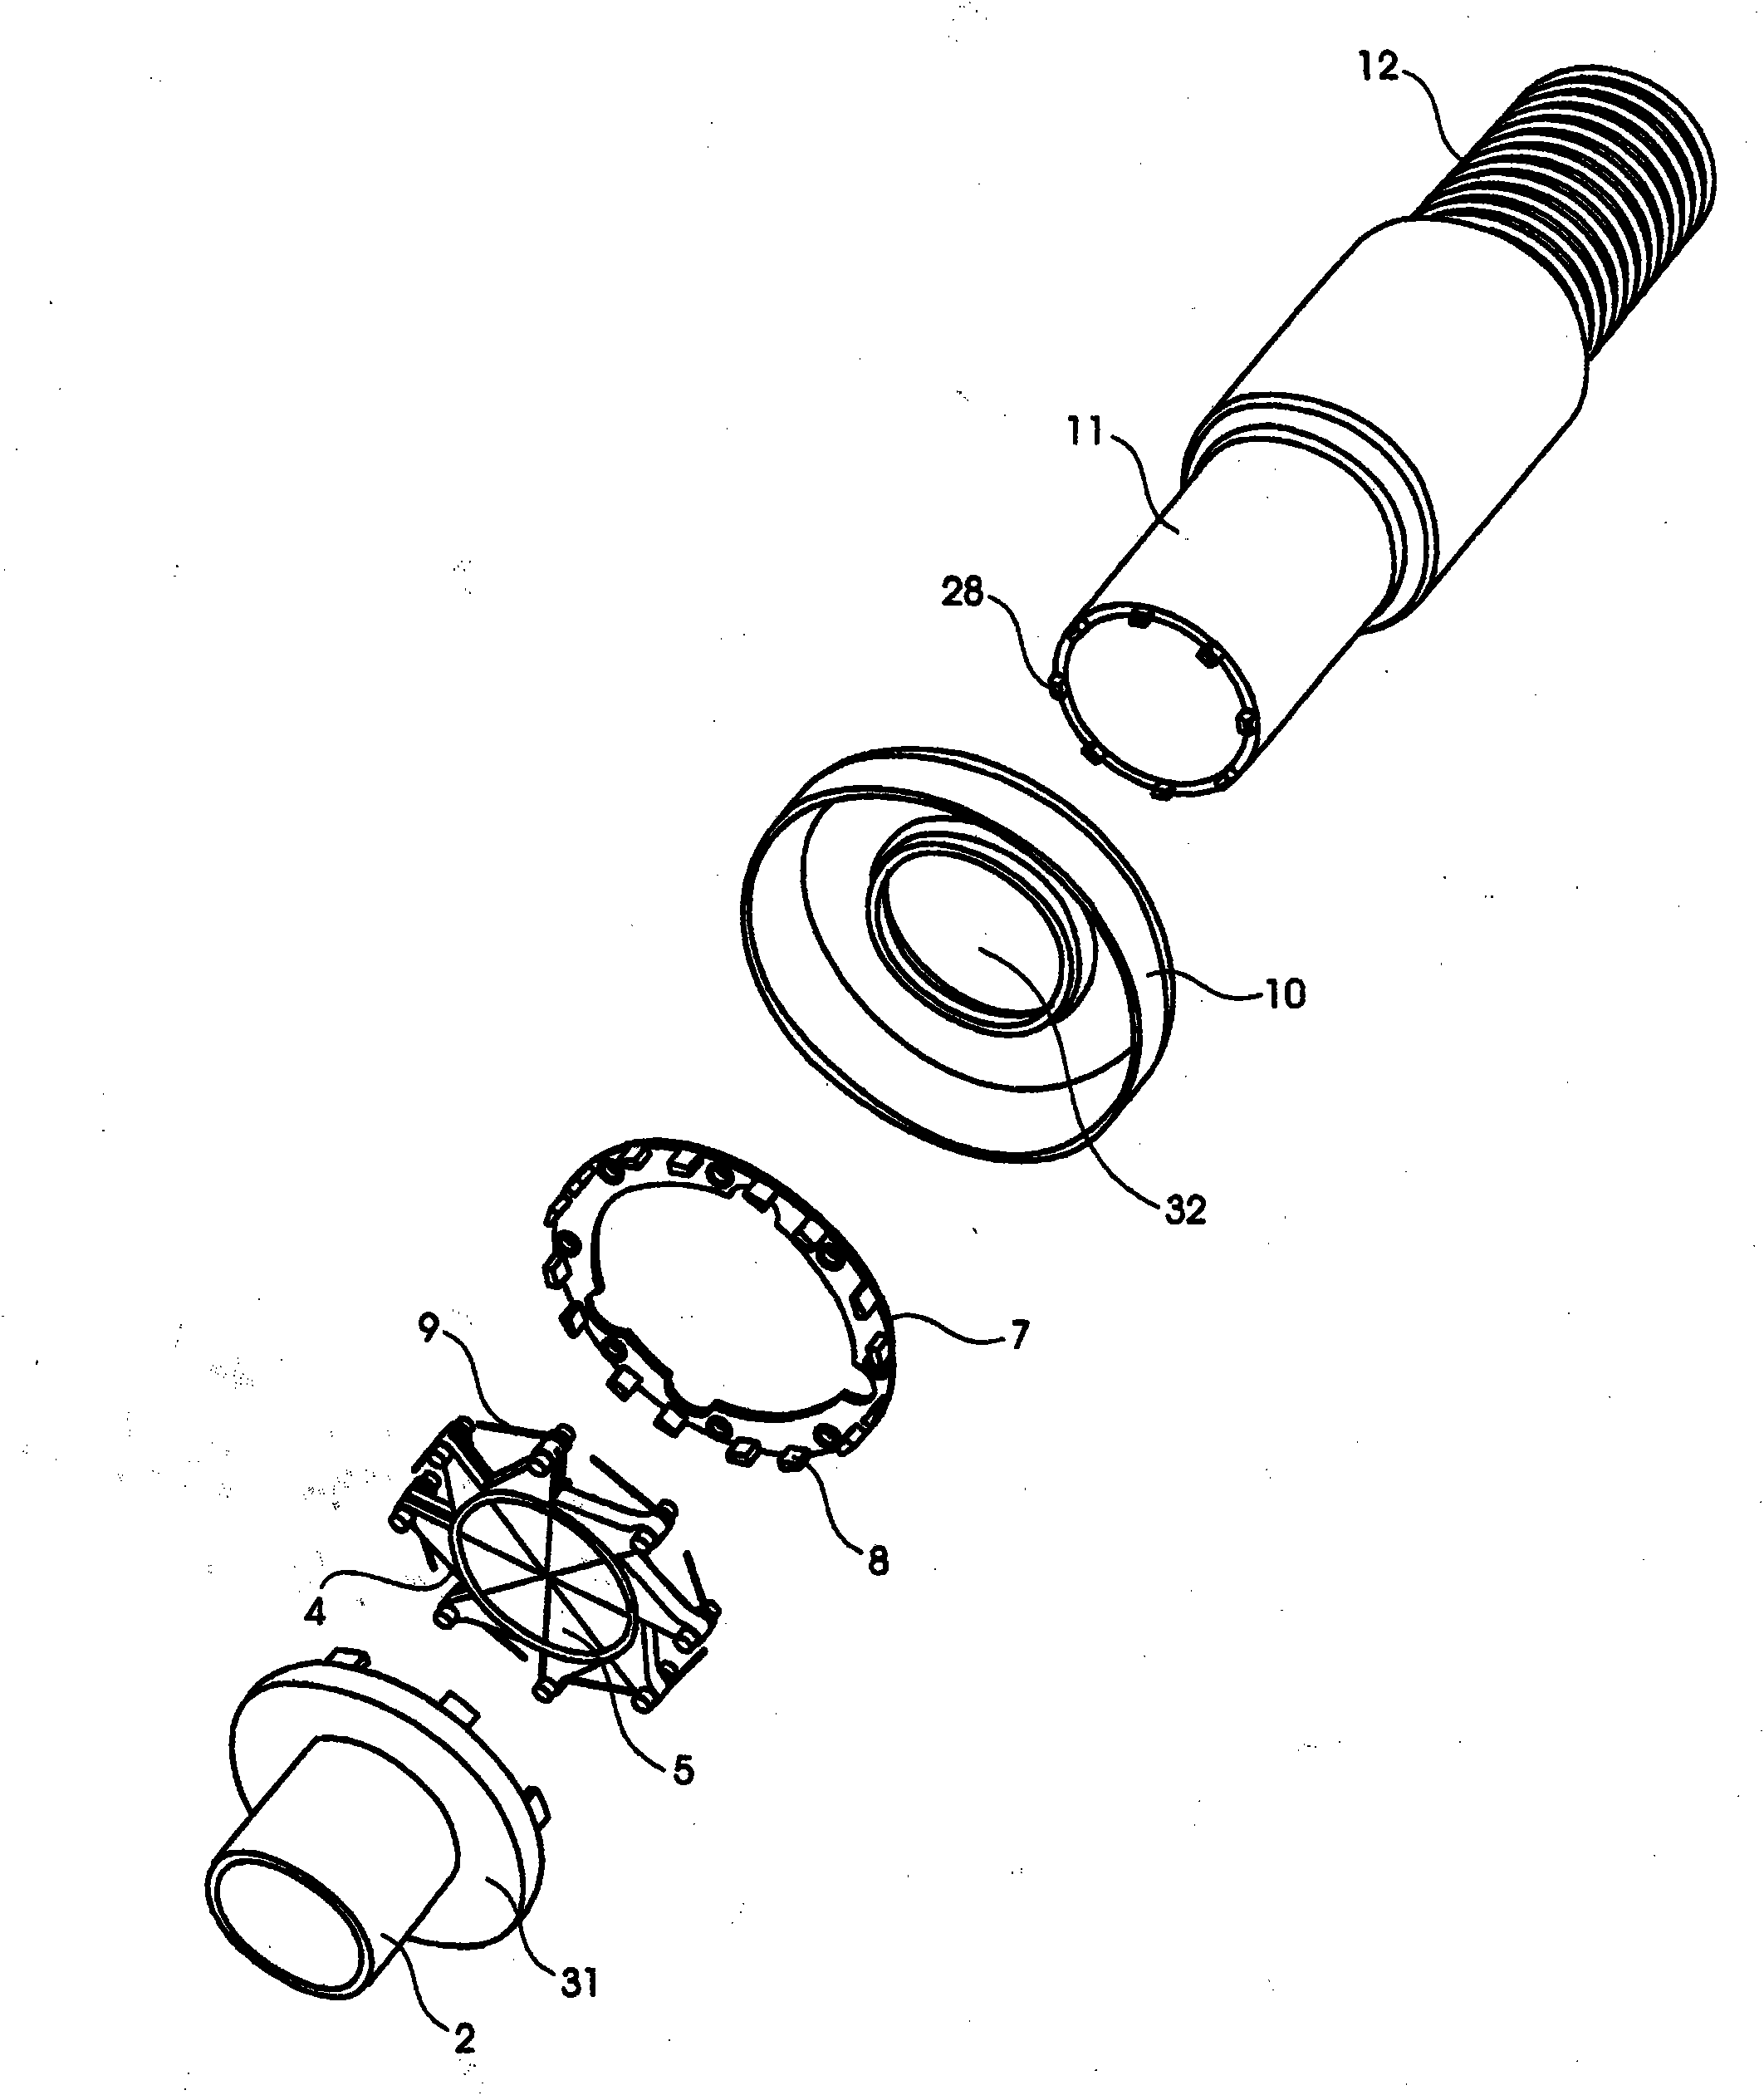 Coupling for coupling a vacuum hose to a central vacuum source